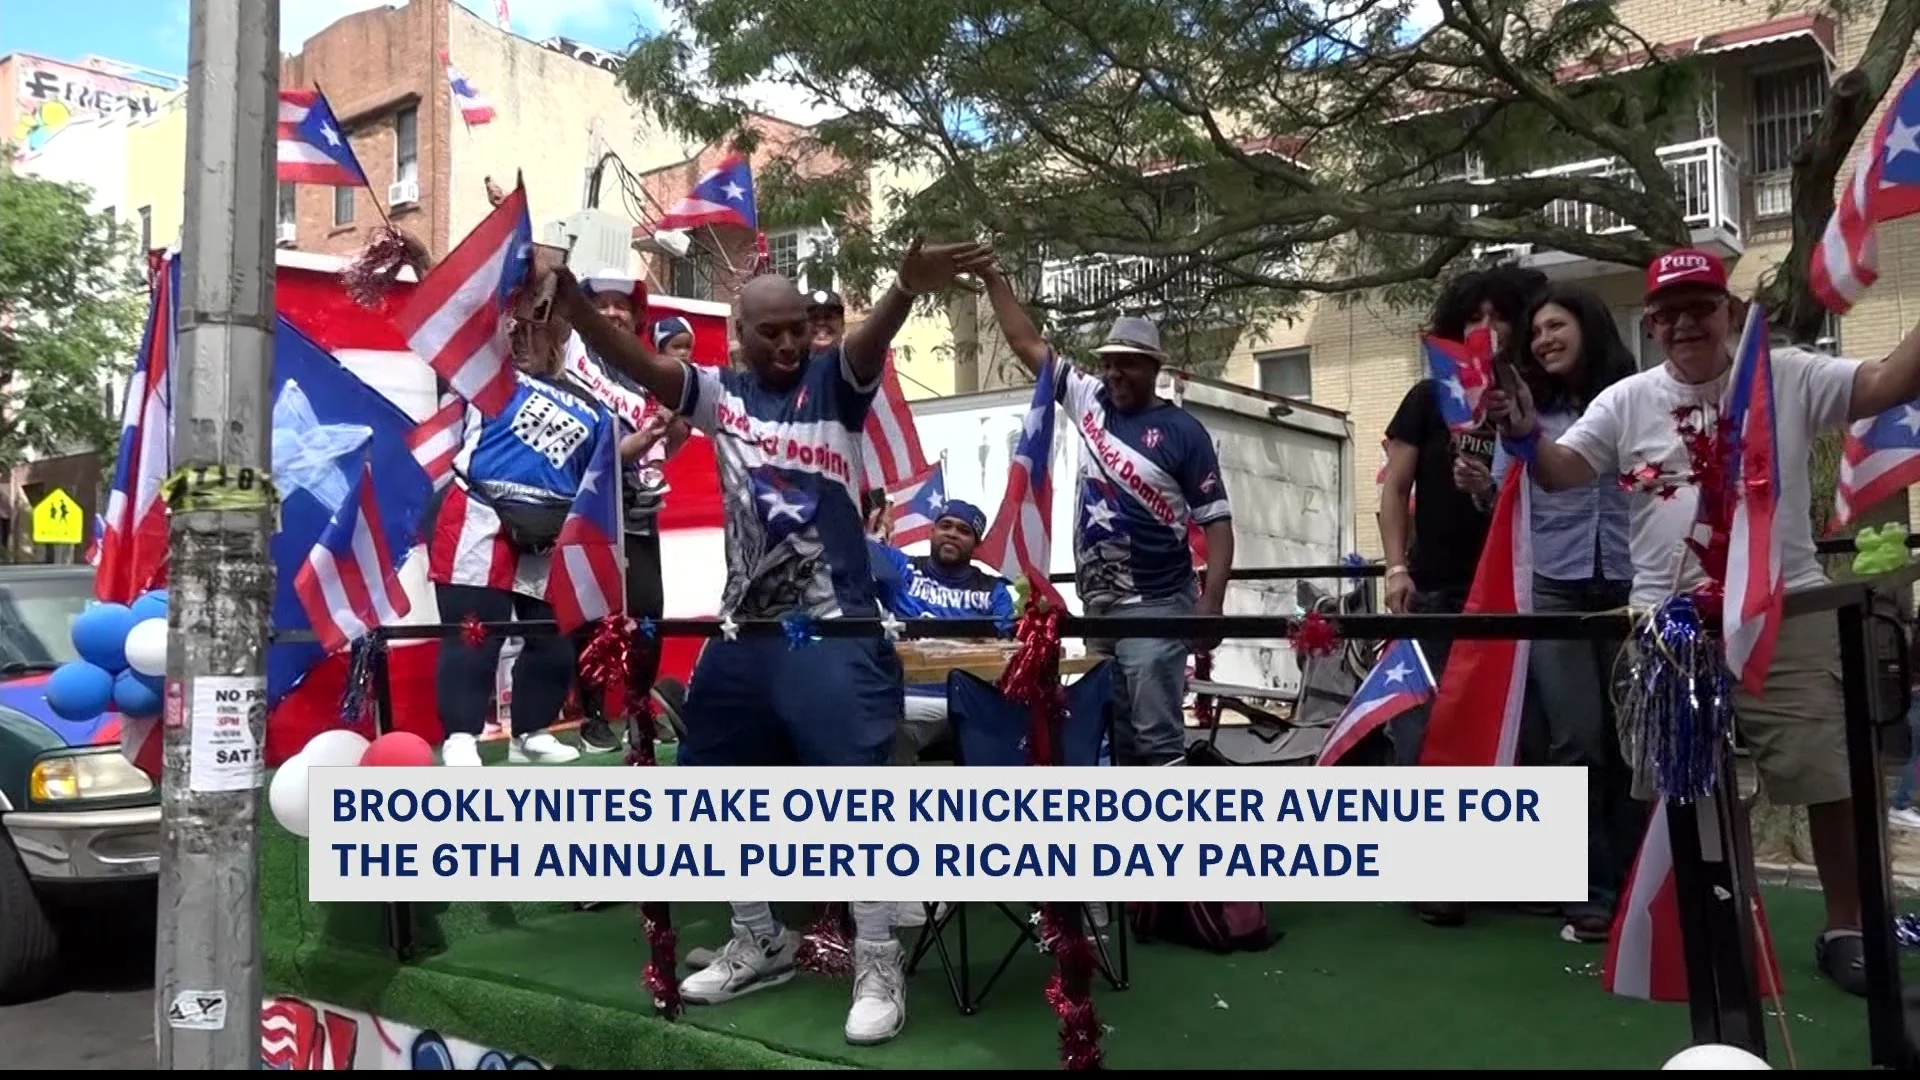 6th annual Puerto Rican Day Parade takes over Knickerbocker Avenue 